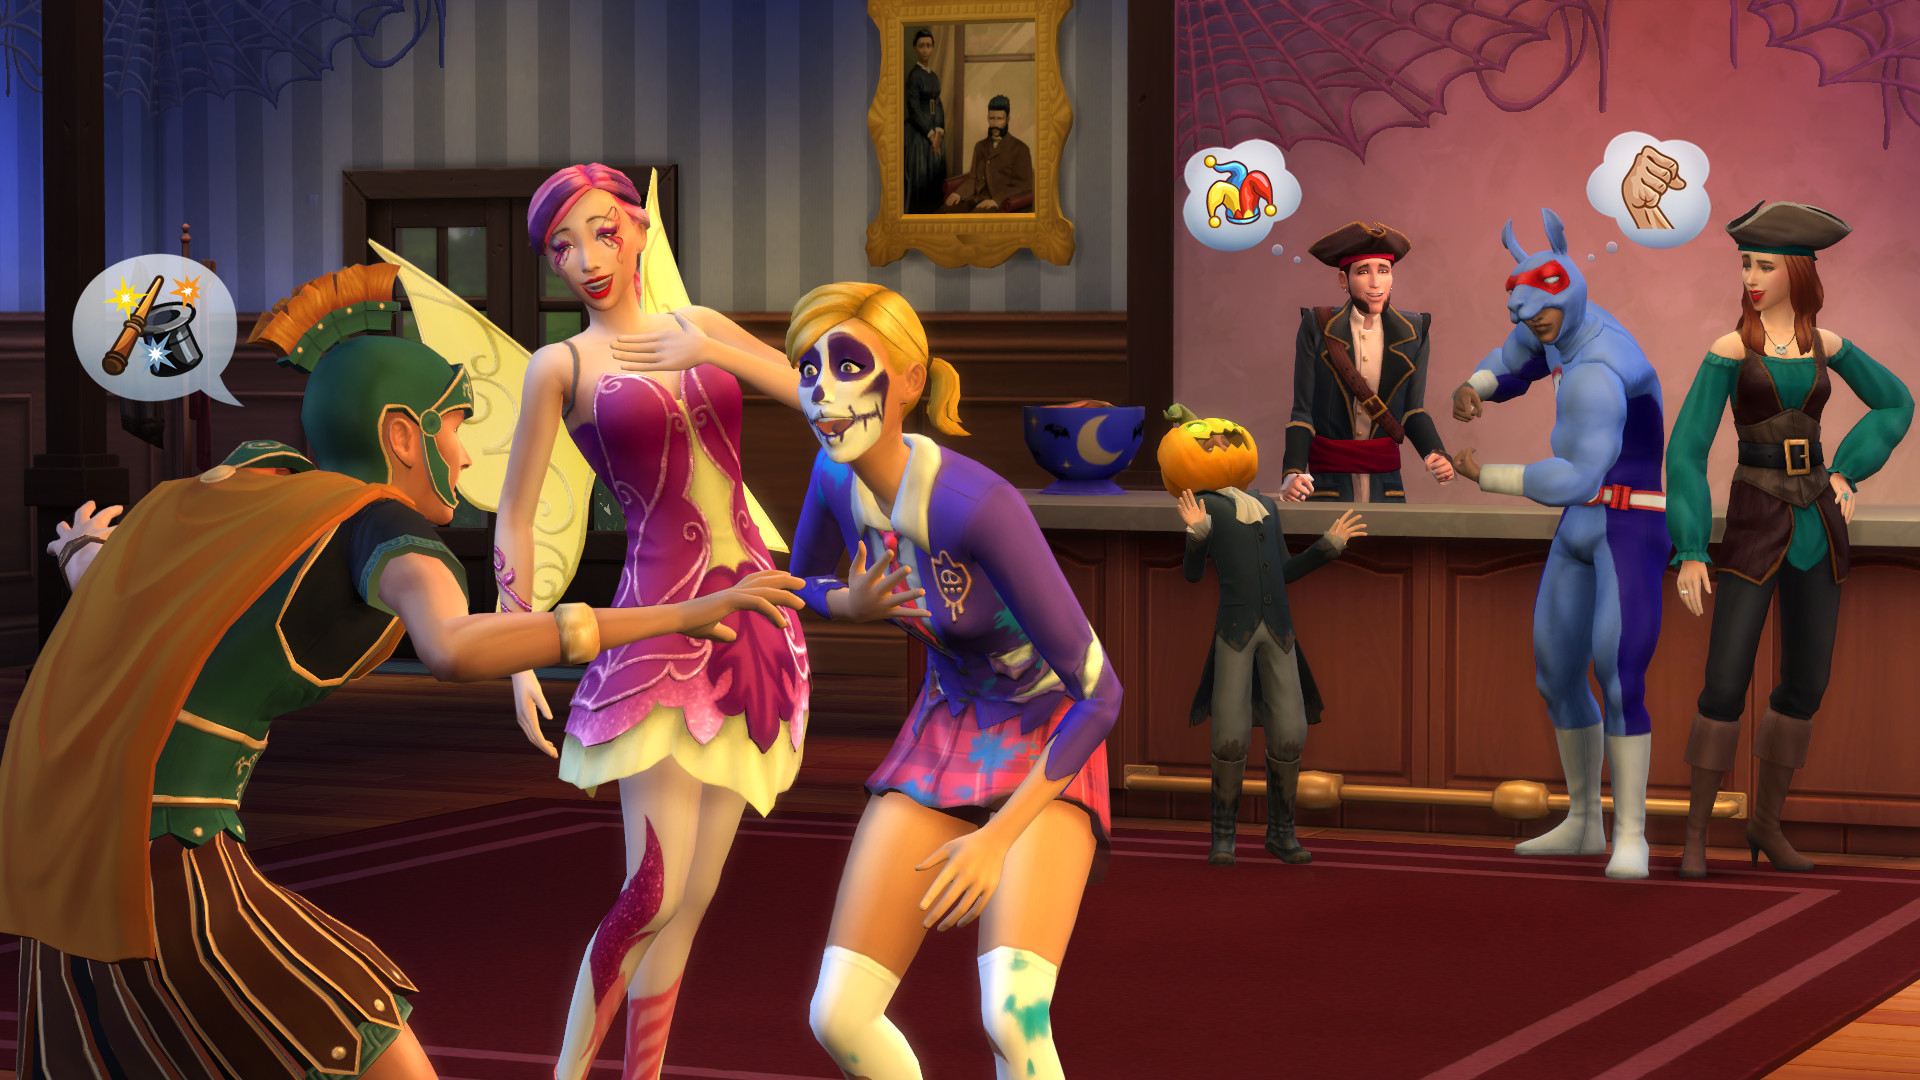 The Sims 4 Spooky Stuff Pack Review